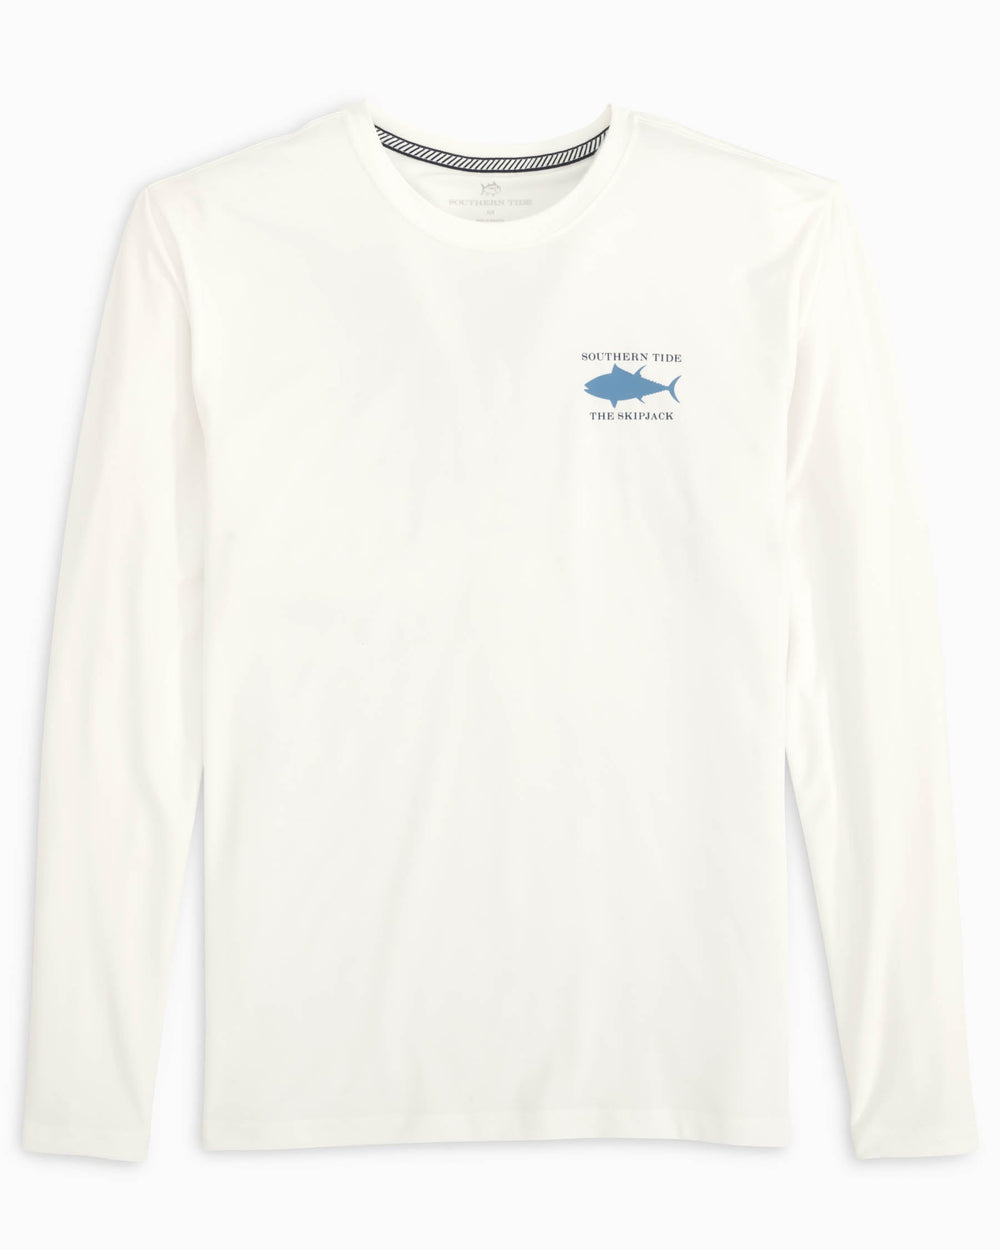 The front view of the Skipjack Silhouette Long Sleeve Performance T-Shirt by Southern Tide - Classic White